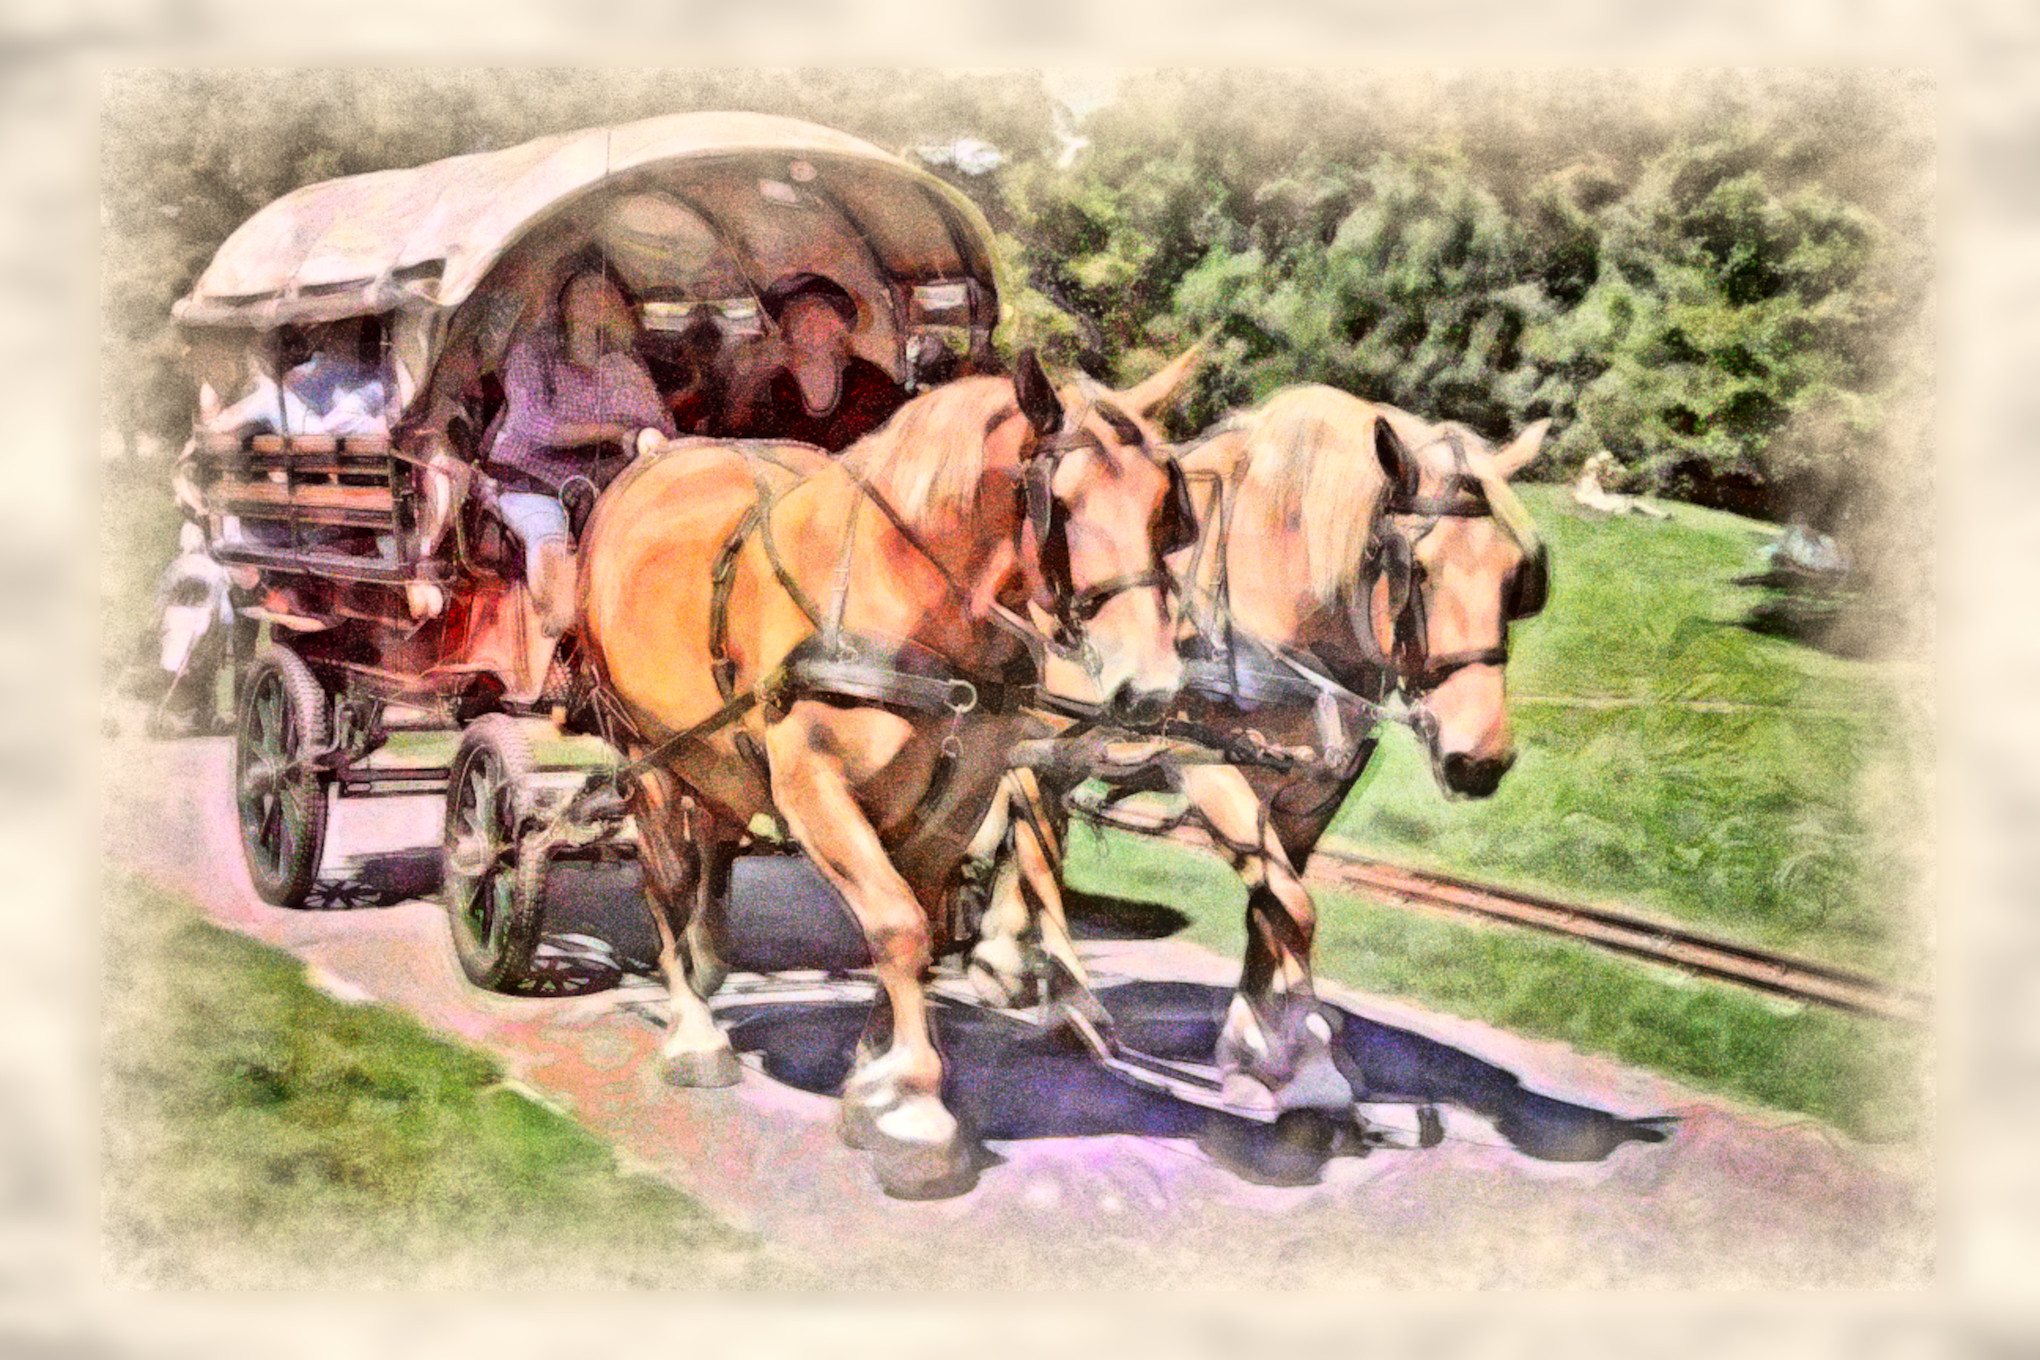 2023-10-02 09-08-23 horse-drawn-cart-4775453 with a Watercolor Pastels Effect 2023 (4.0,75.0,32.0,40.0,18.0,8.0,75.0,False,0).jpg